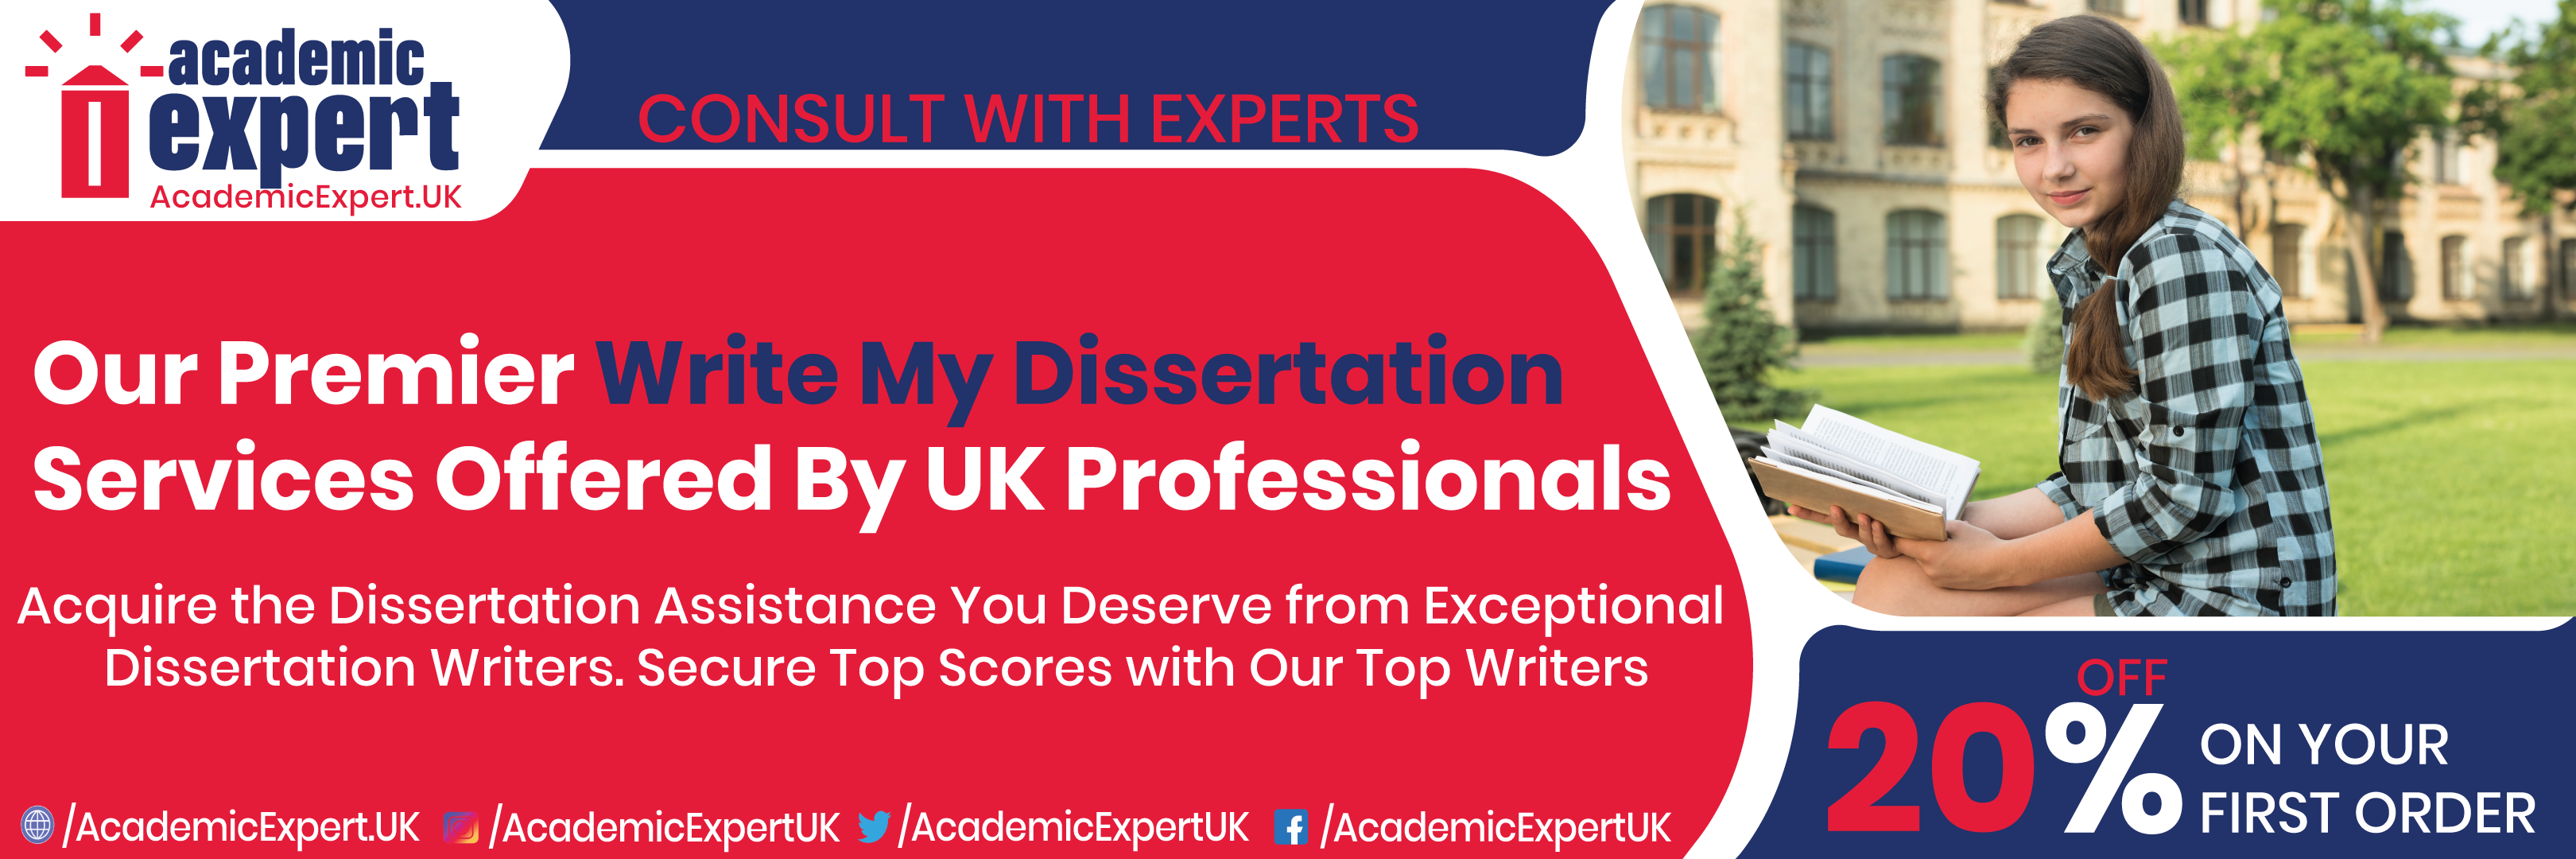 OUR PREMIER WRITE MY DISSERTATION SERVICES OFFERED BY UK PROFESSIONALS